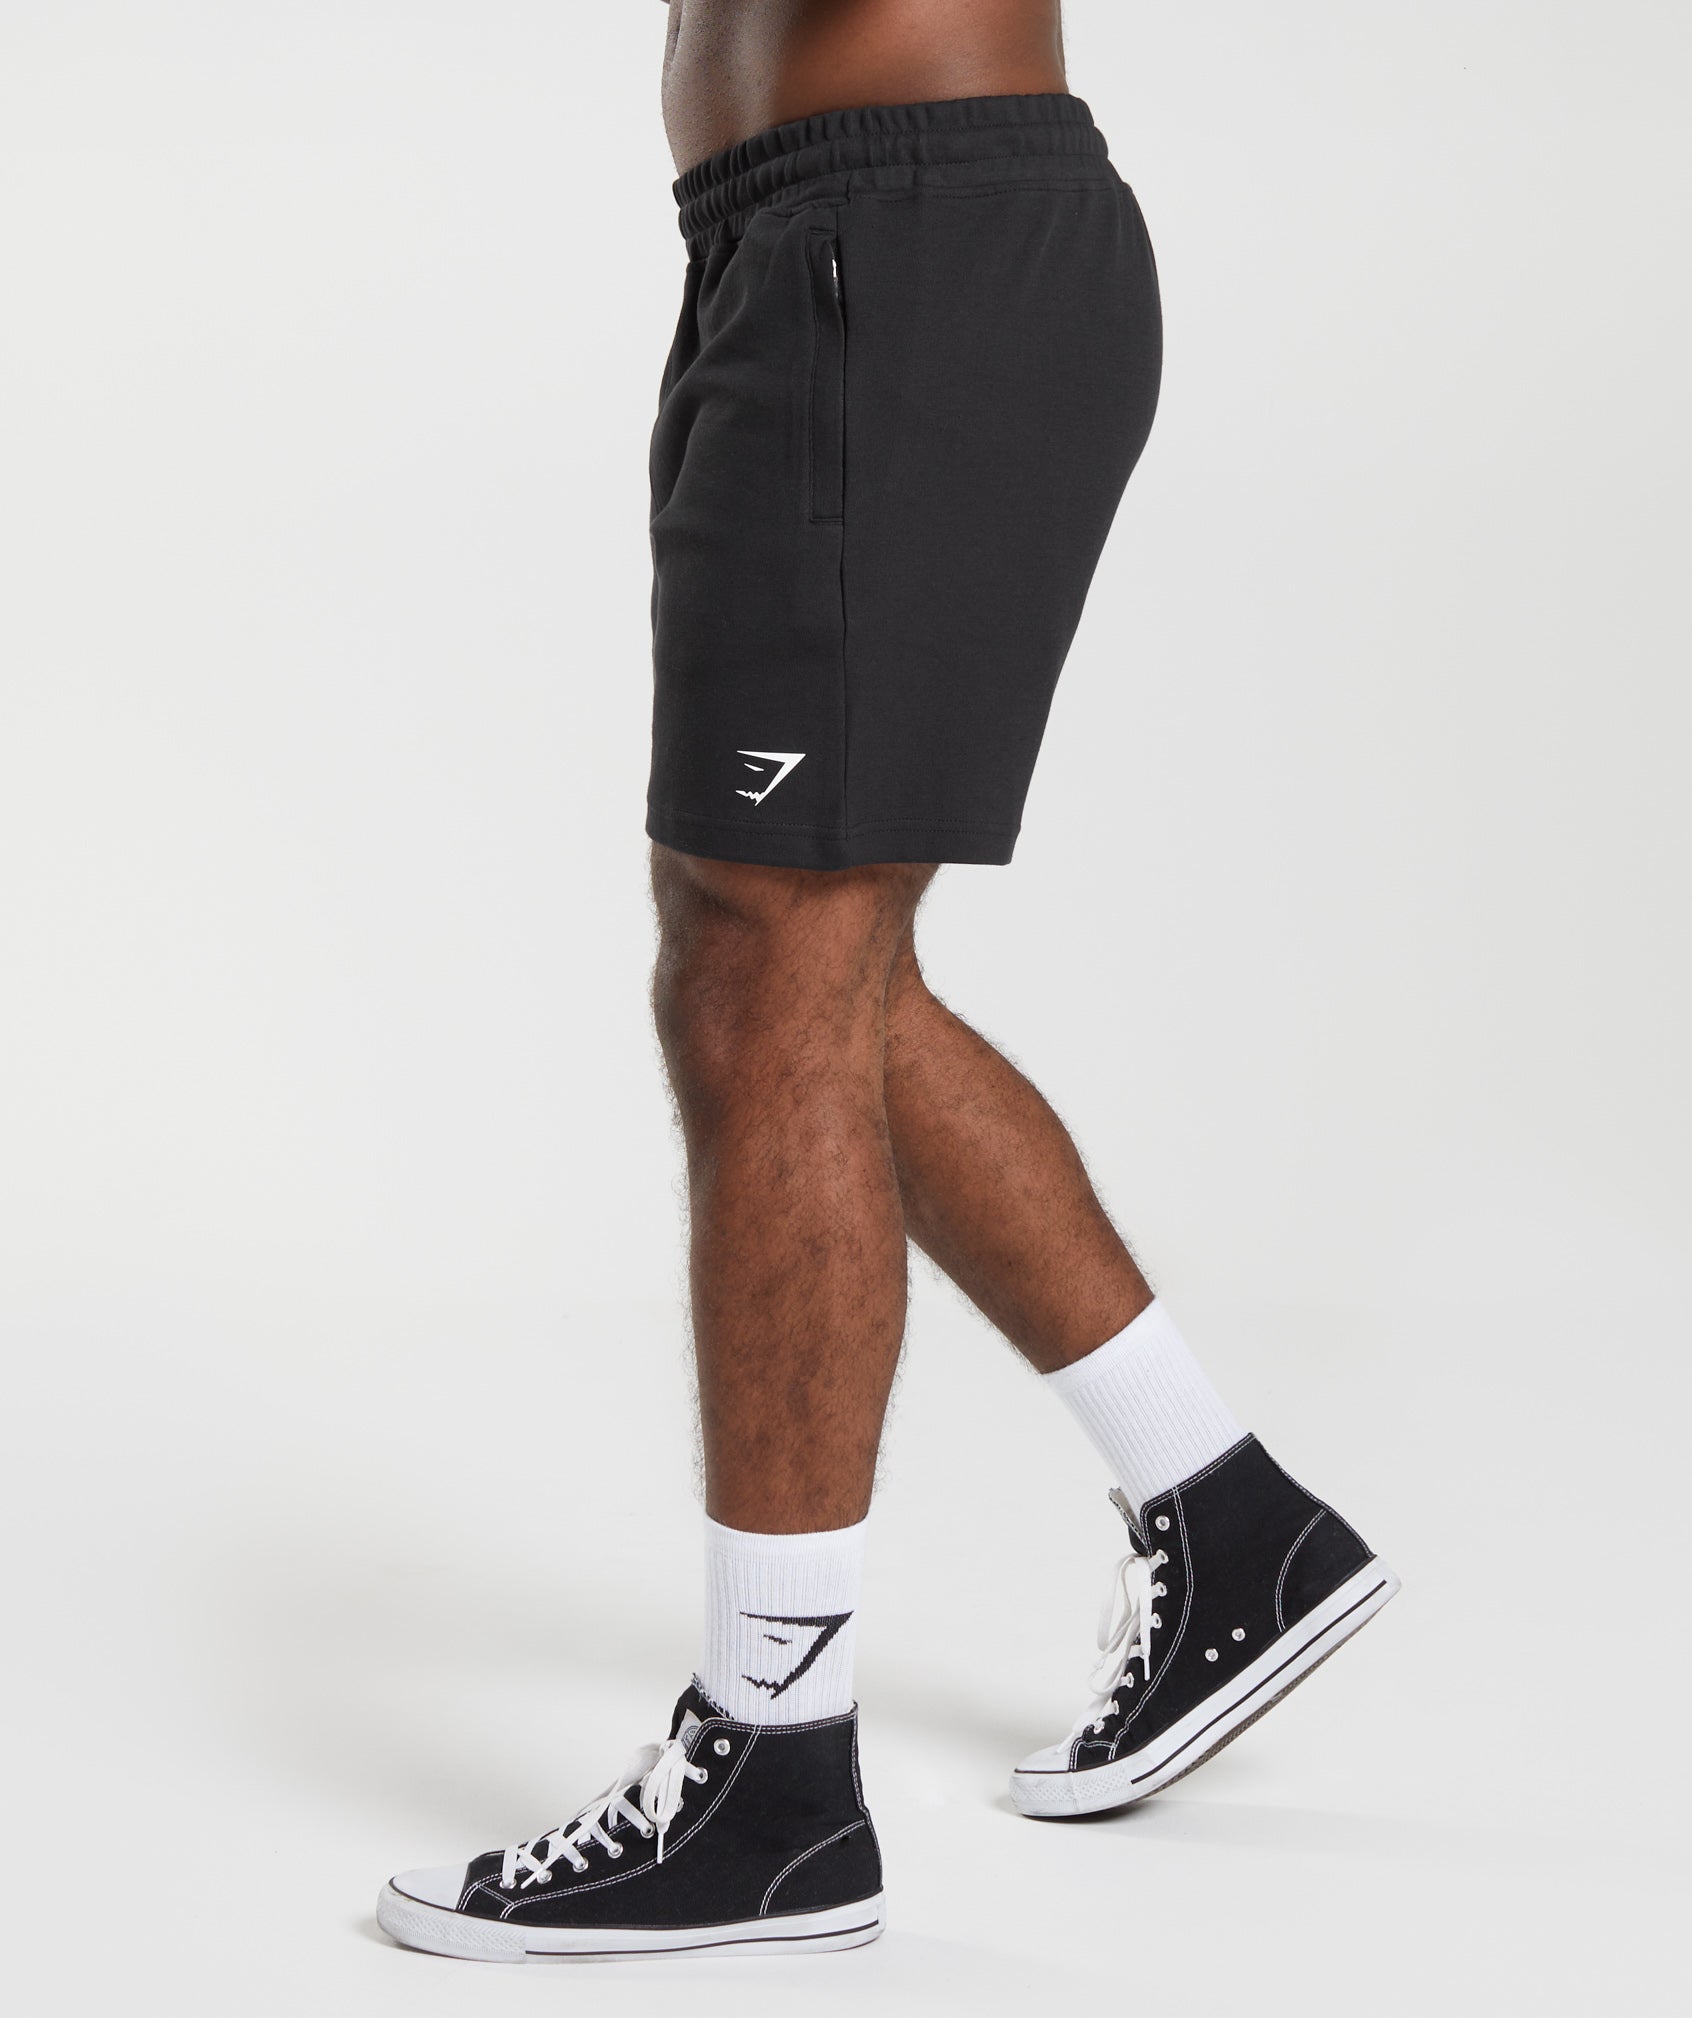 React 7" Shorts in Black - view 3